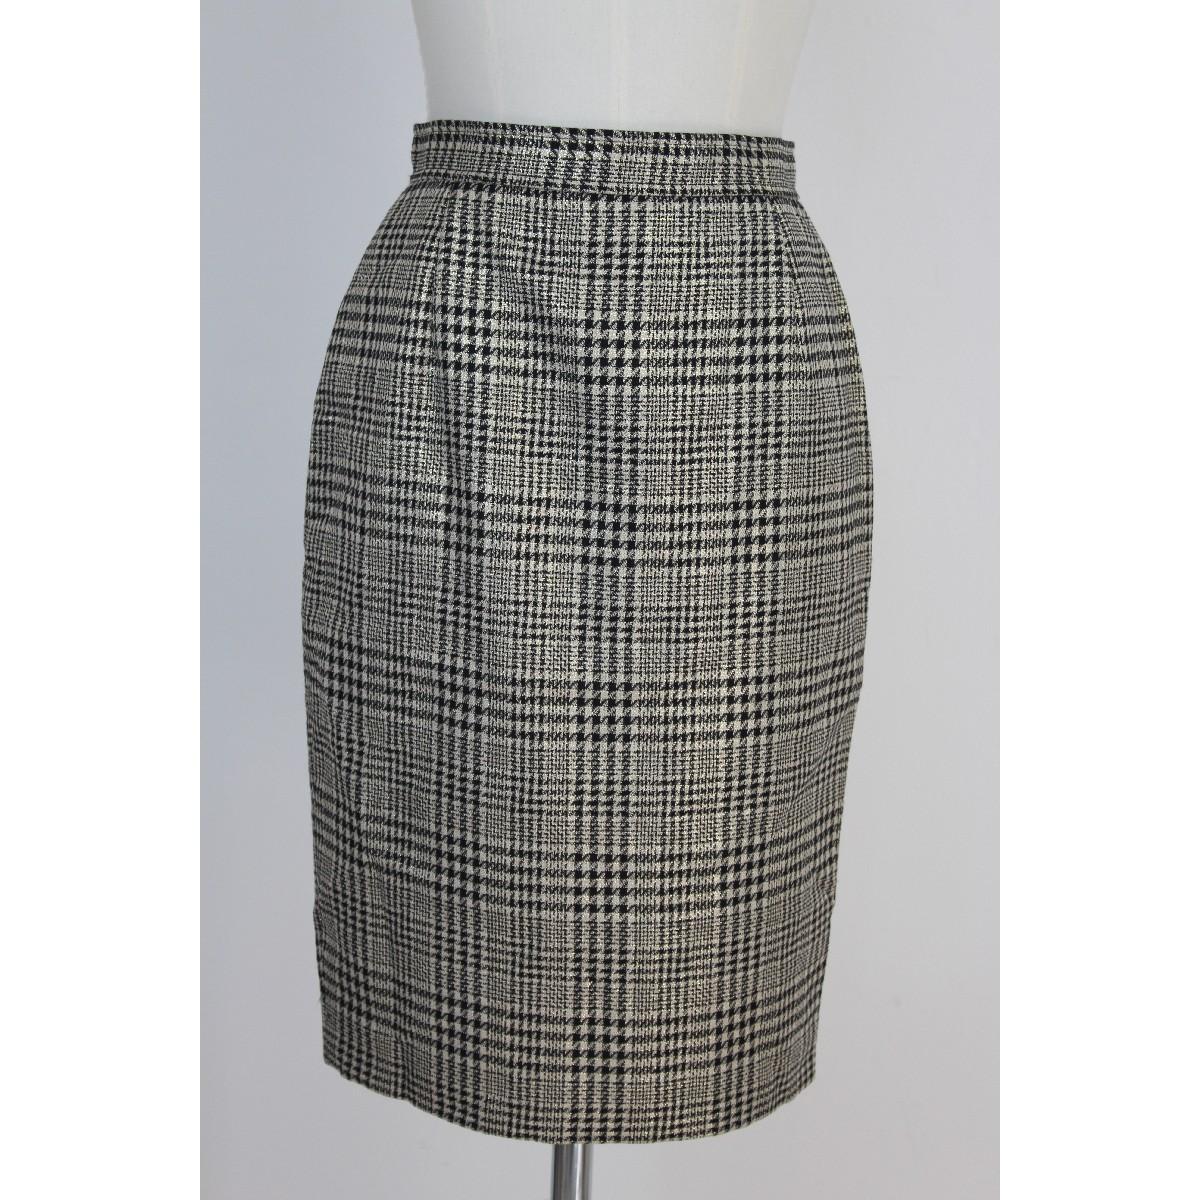 Valentino Prince of Galles Wool Check Dress Gray Skirt Suirt Size 8 Us NWT 1990s 1